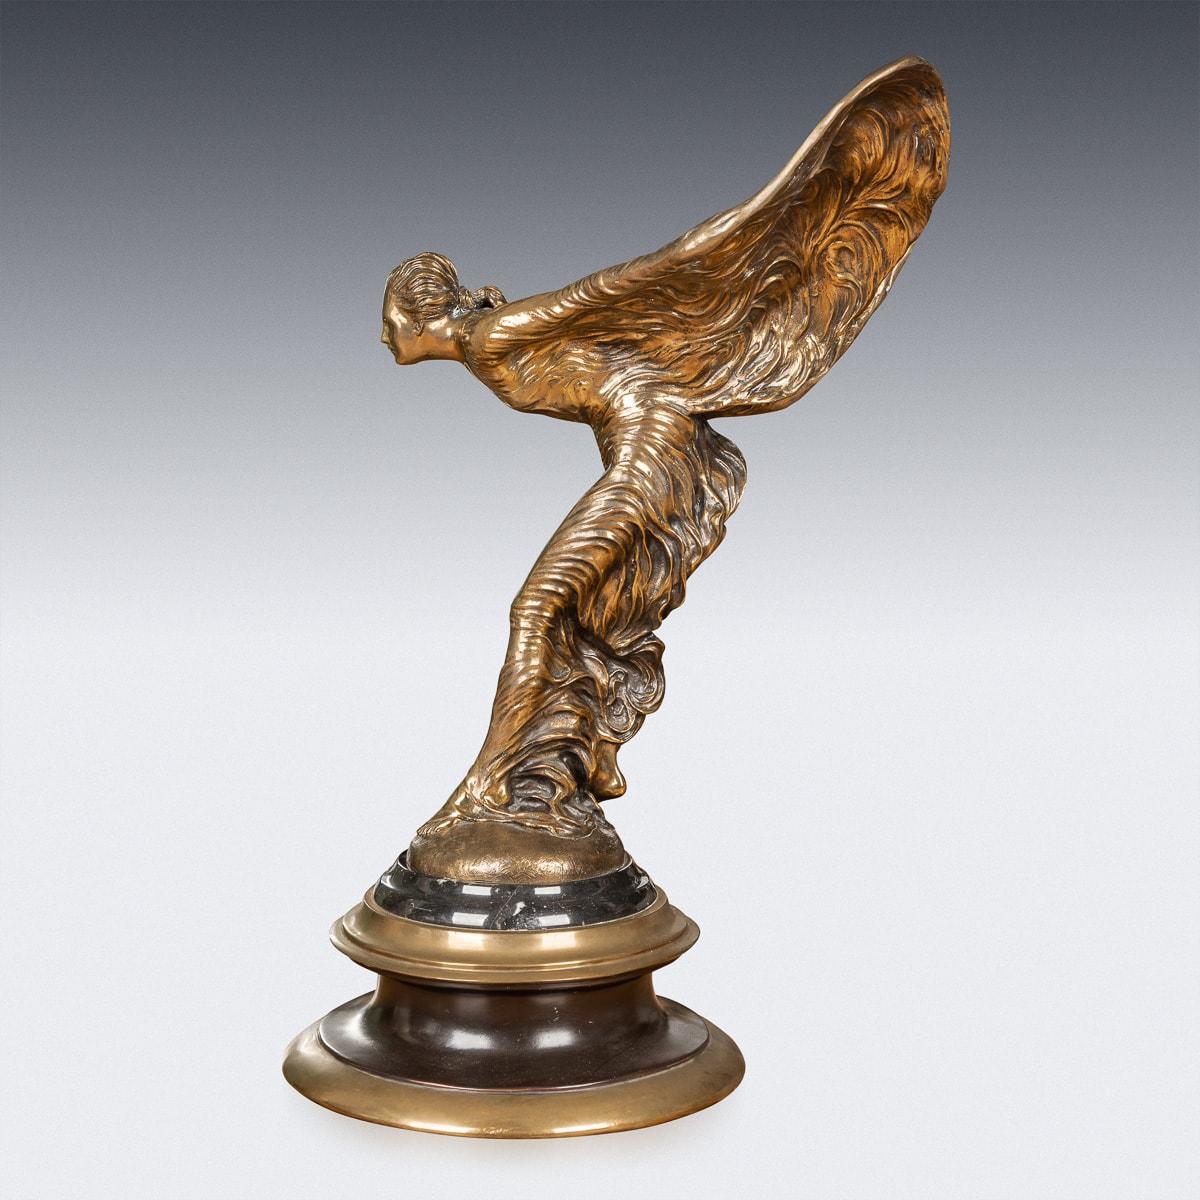 Mid-20th Century British showroom display bronze of the legendary Rolls-Royce mascot which was designed by Charles Sykes R.A, the patinated bronze sculpture is set on a round marble plinth. Signed Charles Sykes - (later cast). The Spirit of Ecstasy,